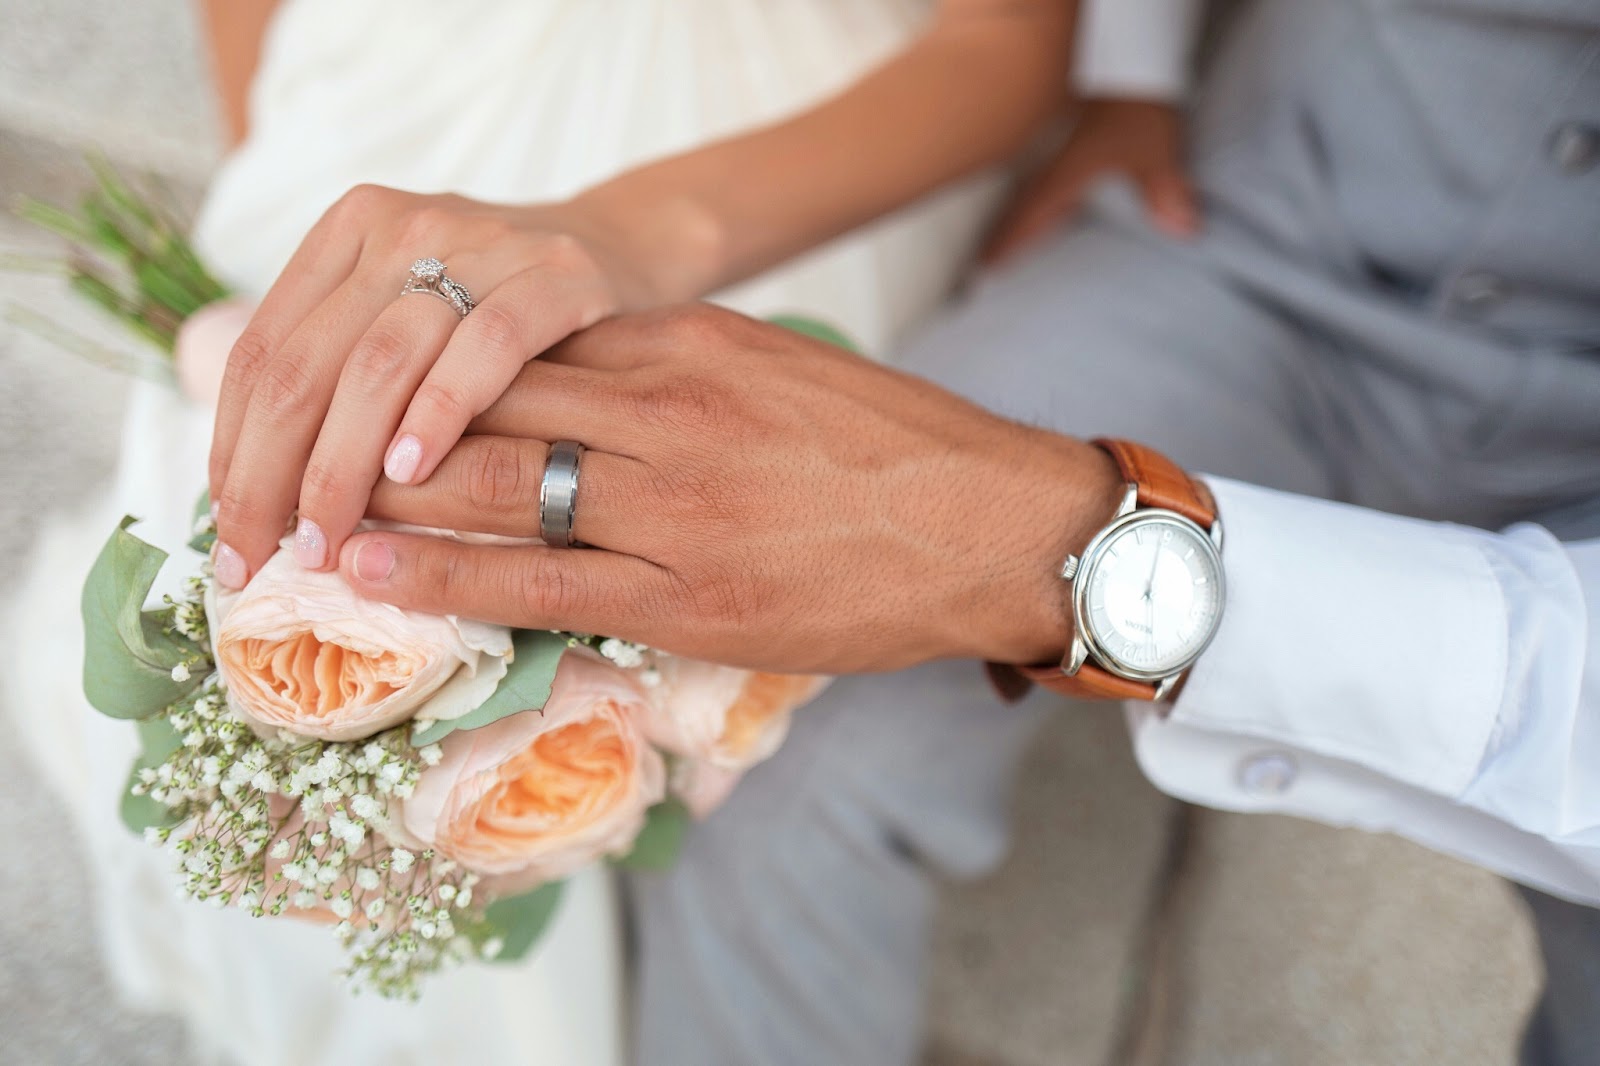 A couple showing off wedding rings during a symbolic ceremony. 